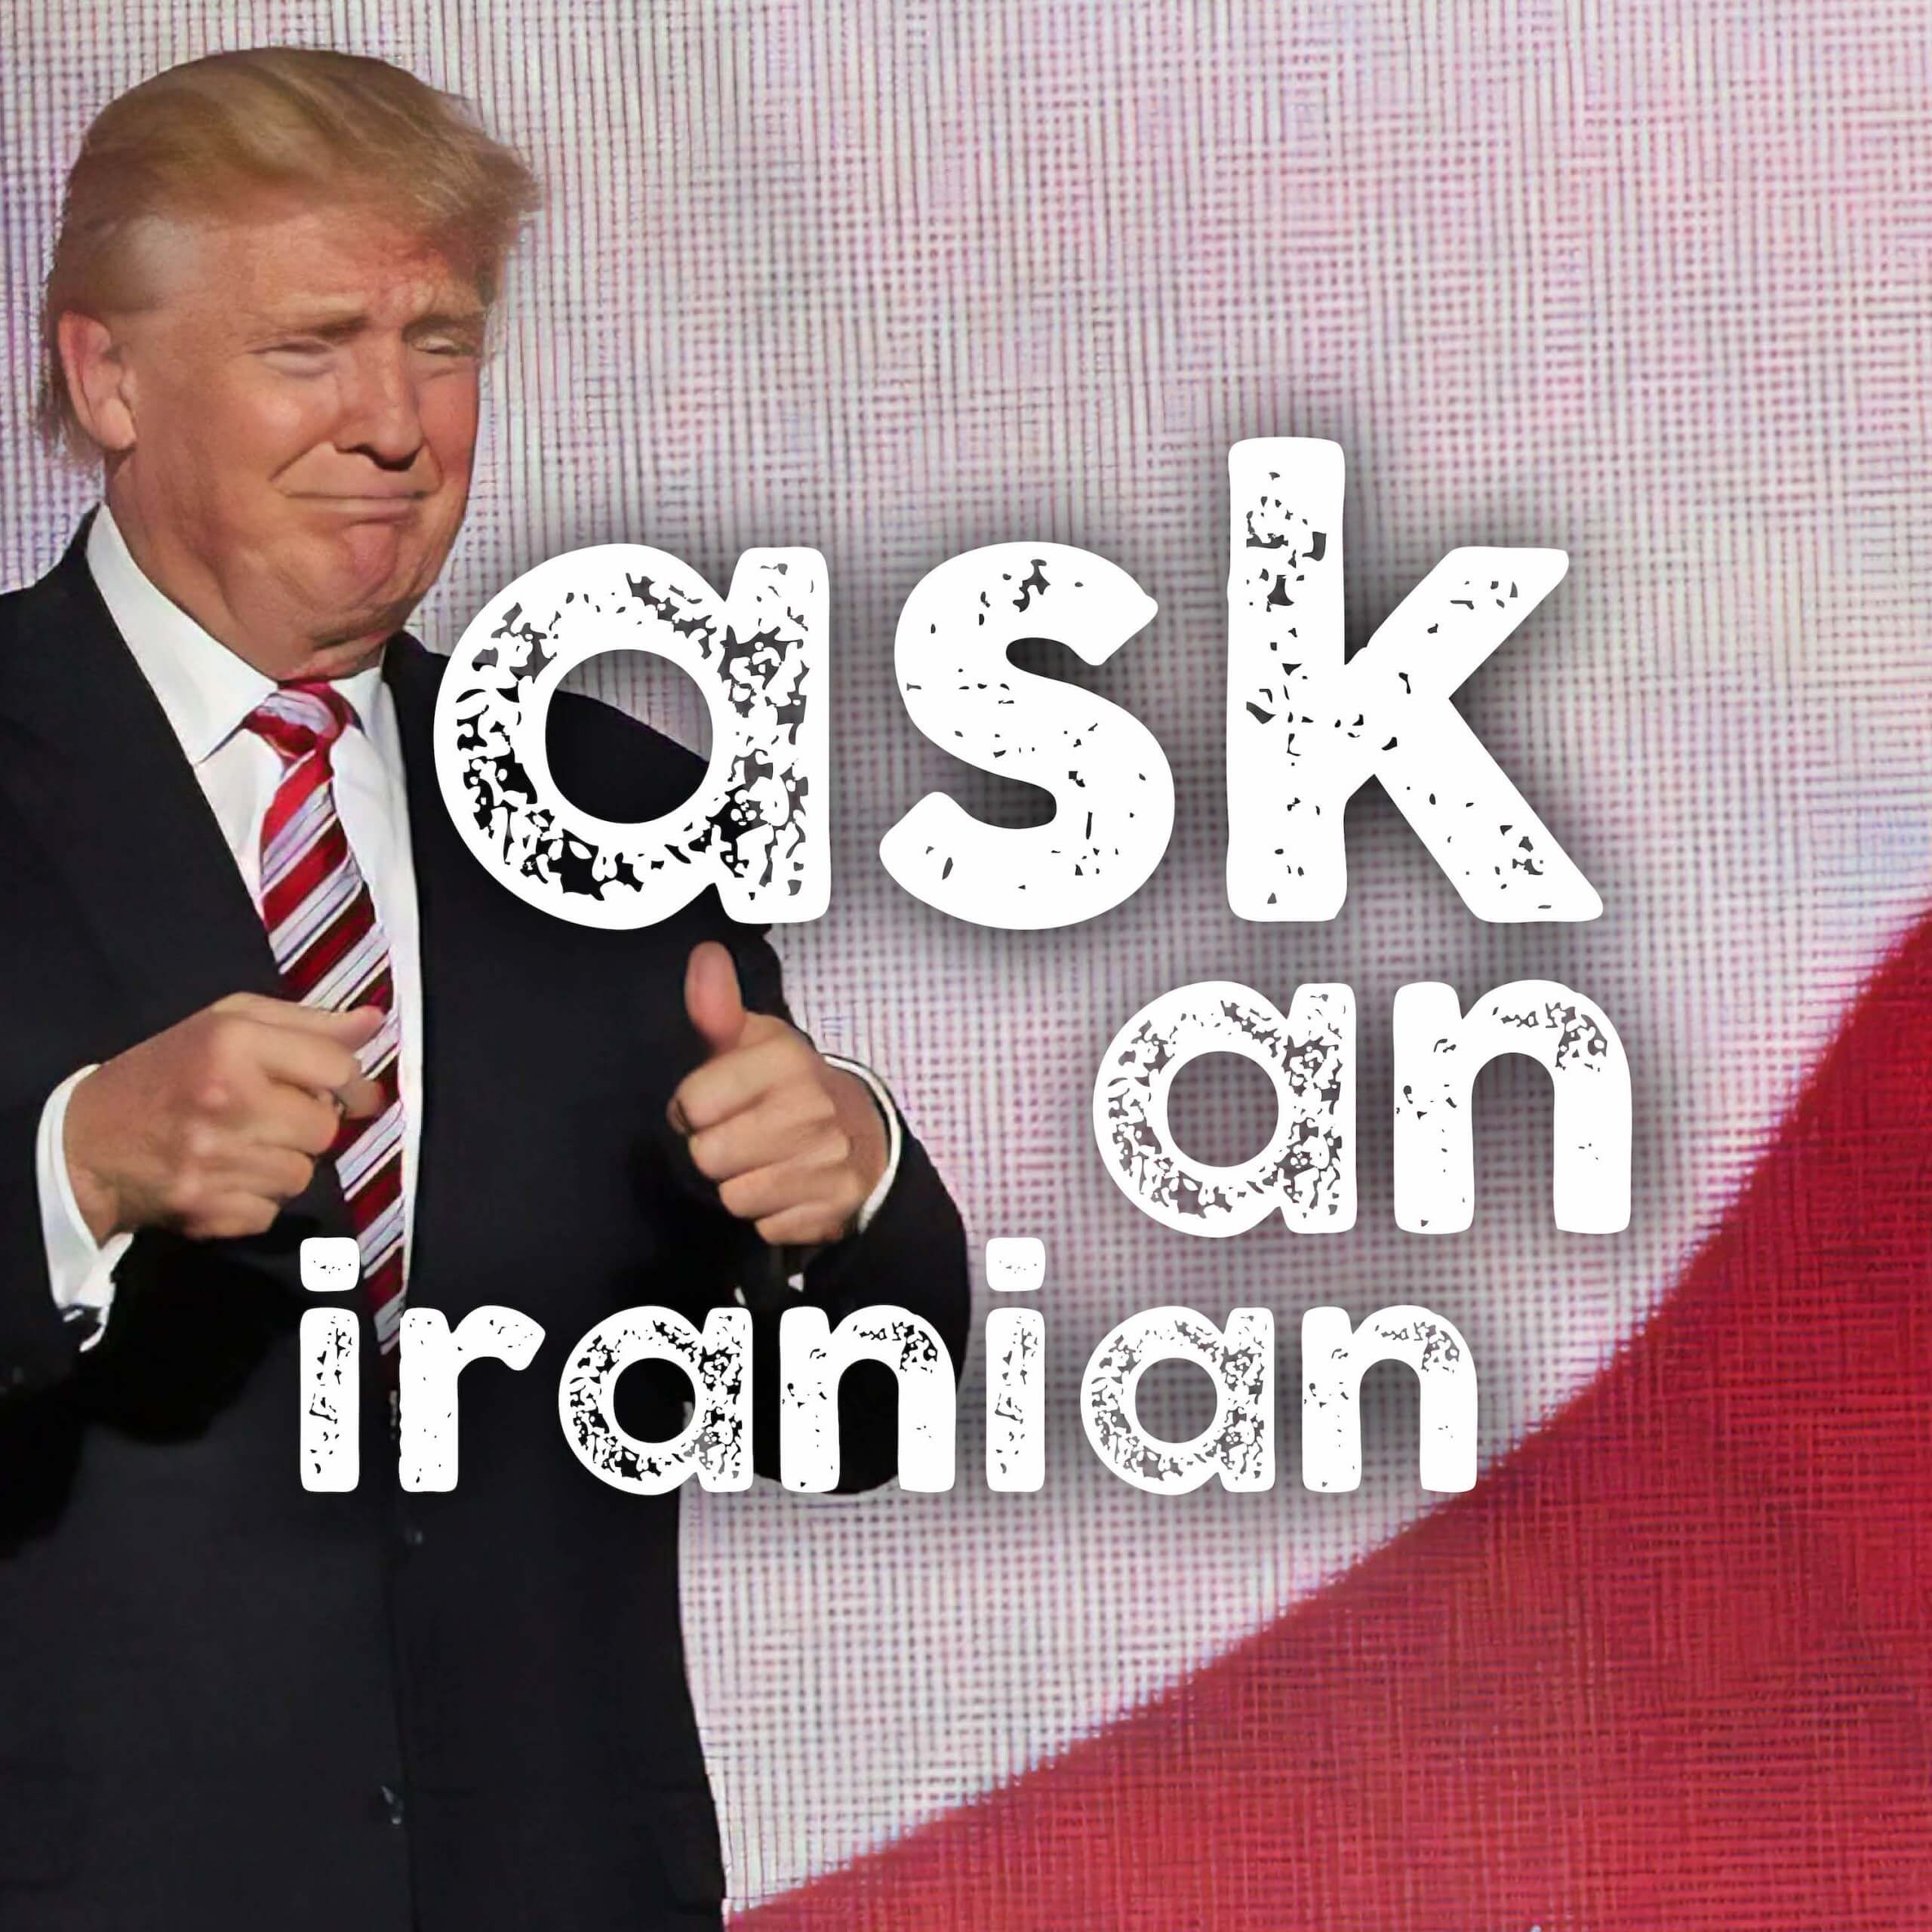 Why do Iranians support Trump?